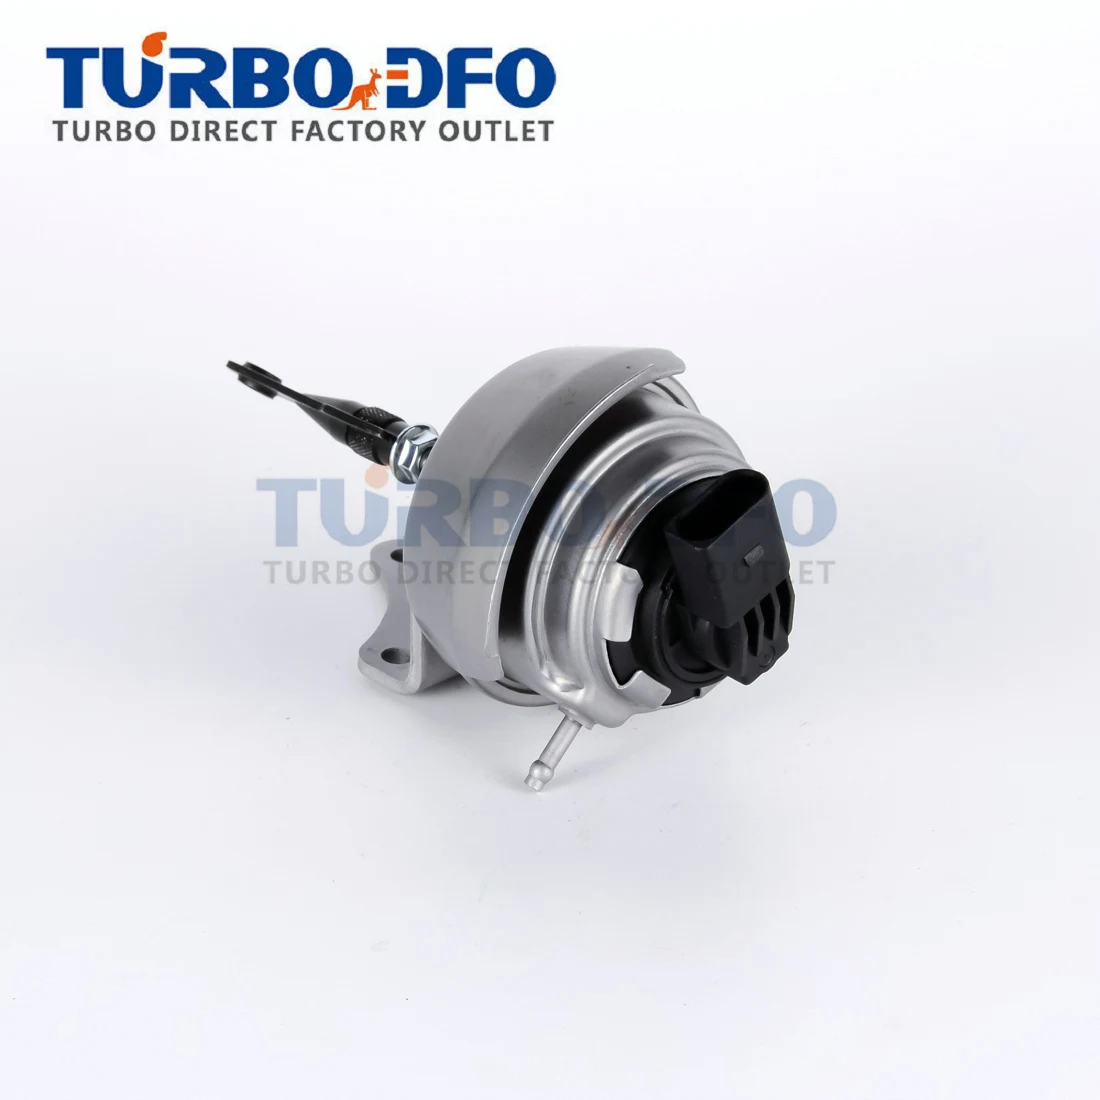 

Car Turbocharger Electronic Actuator 789016-0002 03P253019BX For VW Polo 6R 1.2 TDI 2009/10-2014/12 1199 ccm, 55 KW, 75 PS